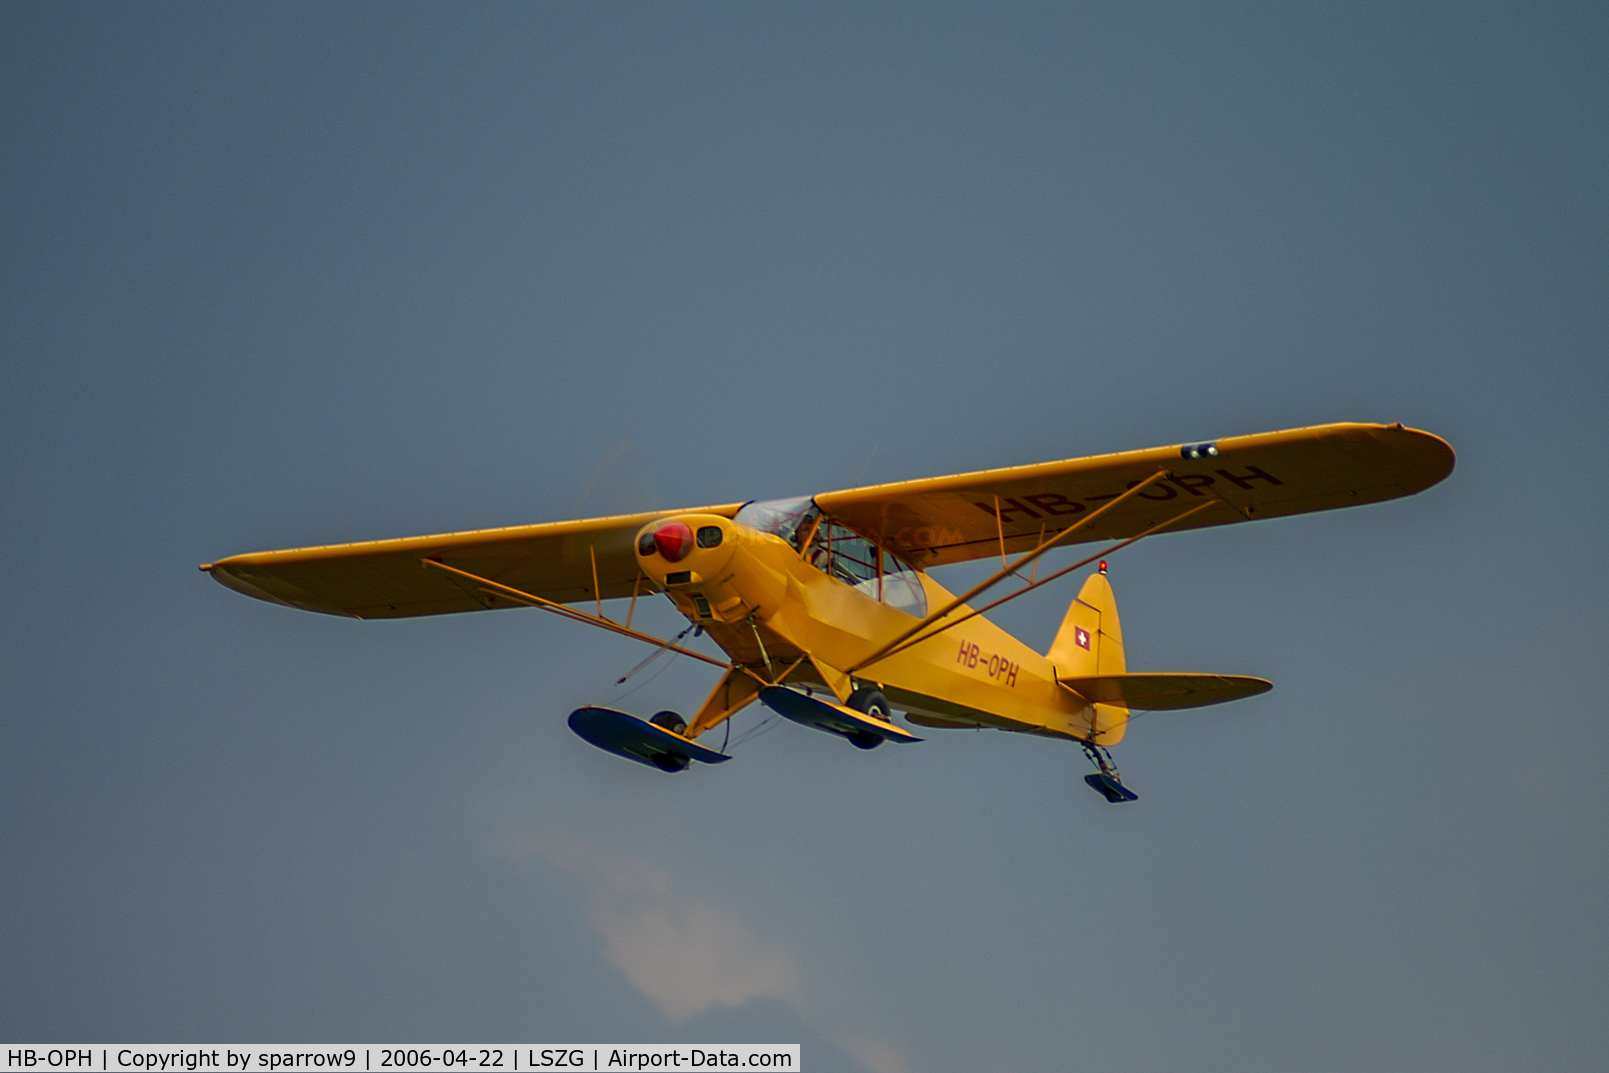 HB-OPH, 1957 Piper PA-18-150 Super Cub C/N 18-5517, Climbing out of Grenchen